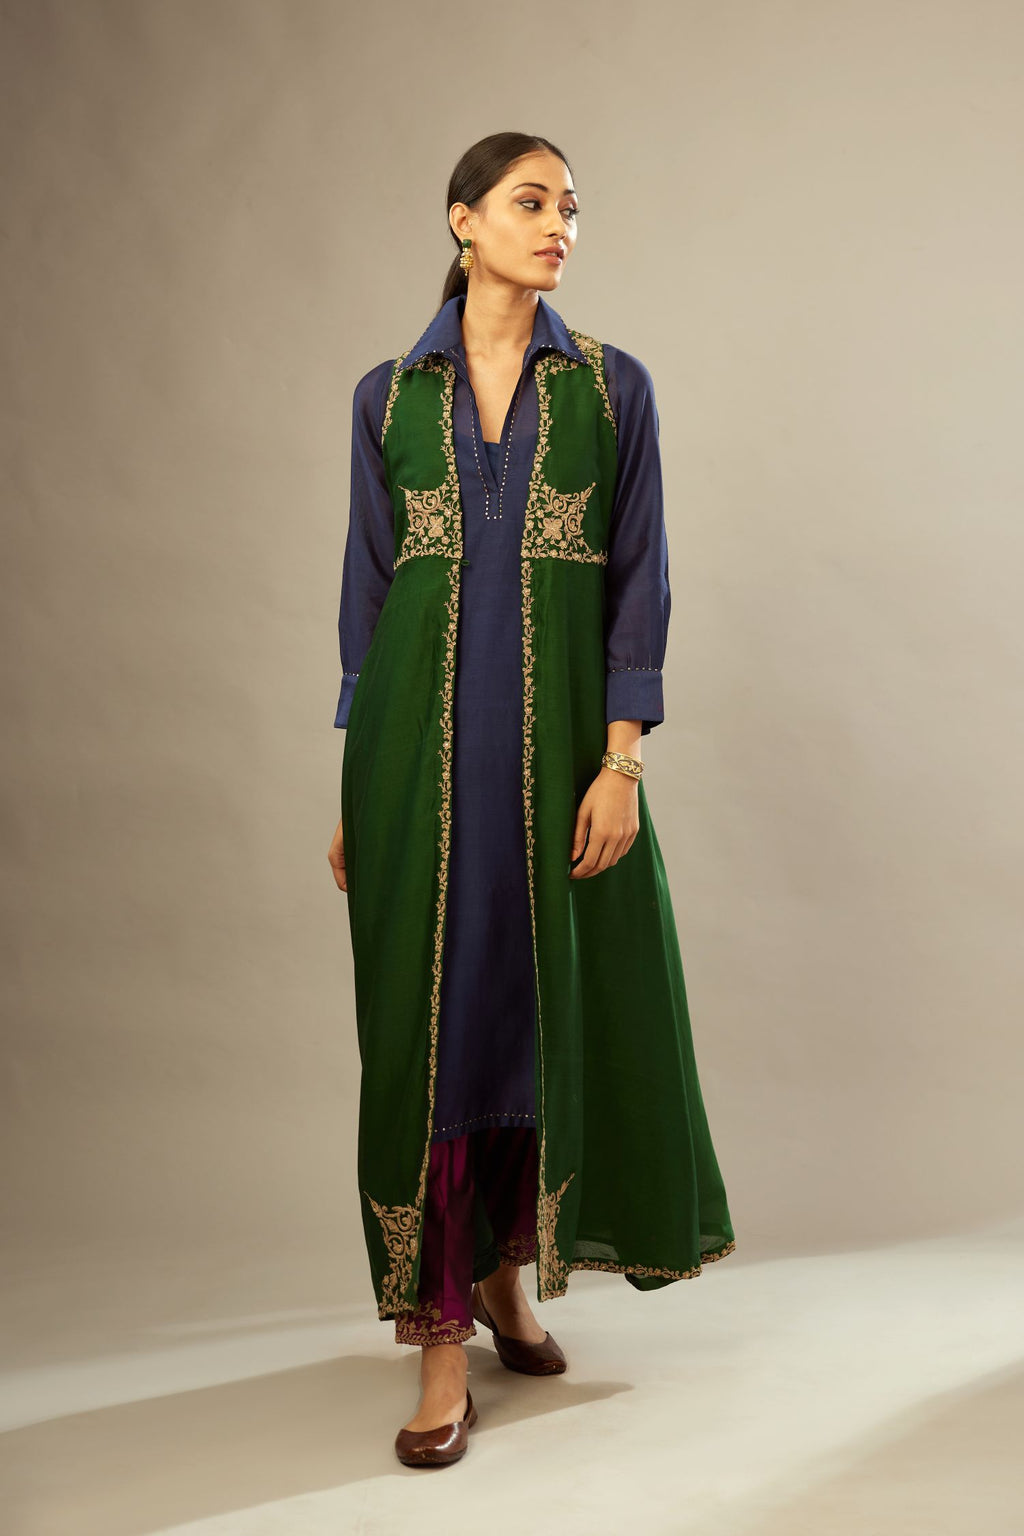 Green long silk chanderi front open sleeveless jacket set with gold dori embroidery detailing, highlighted with gold sequin work.